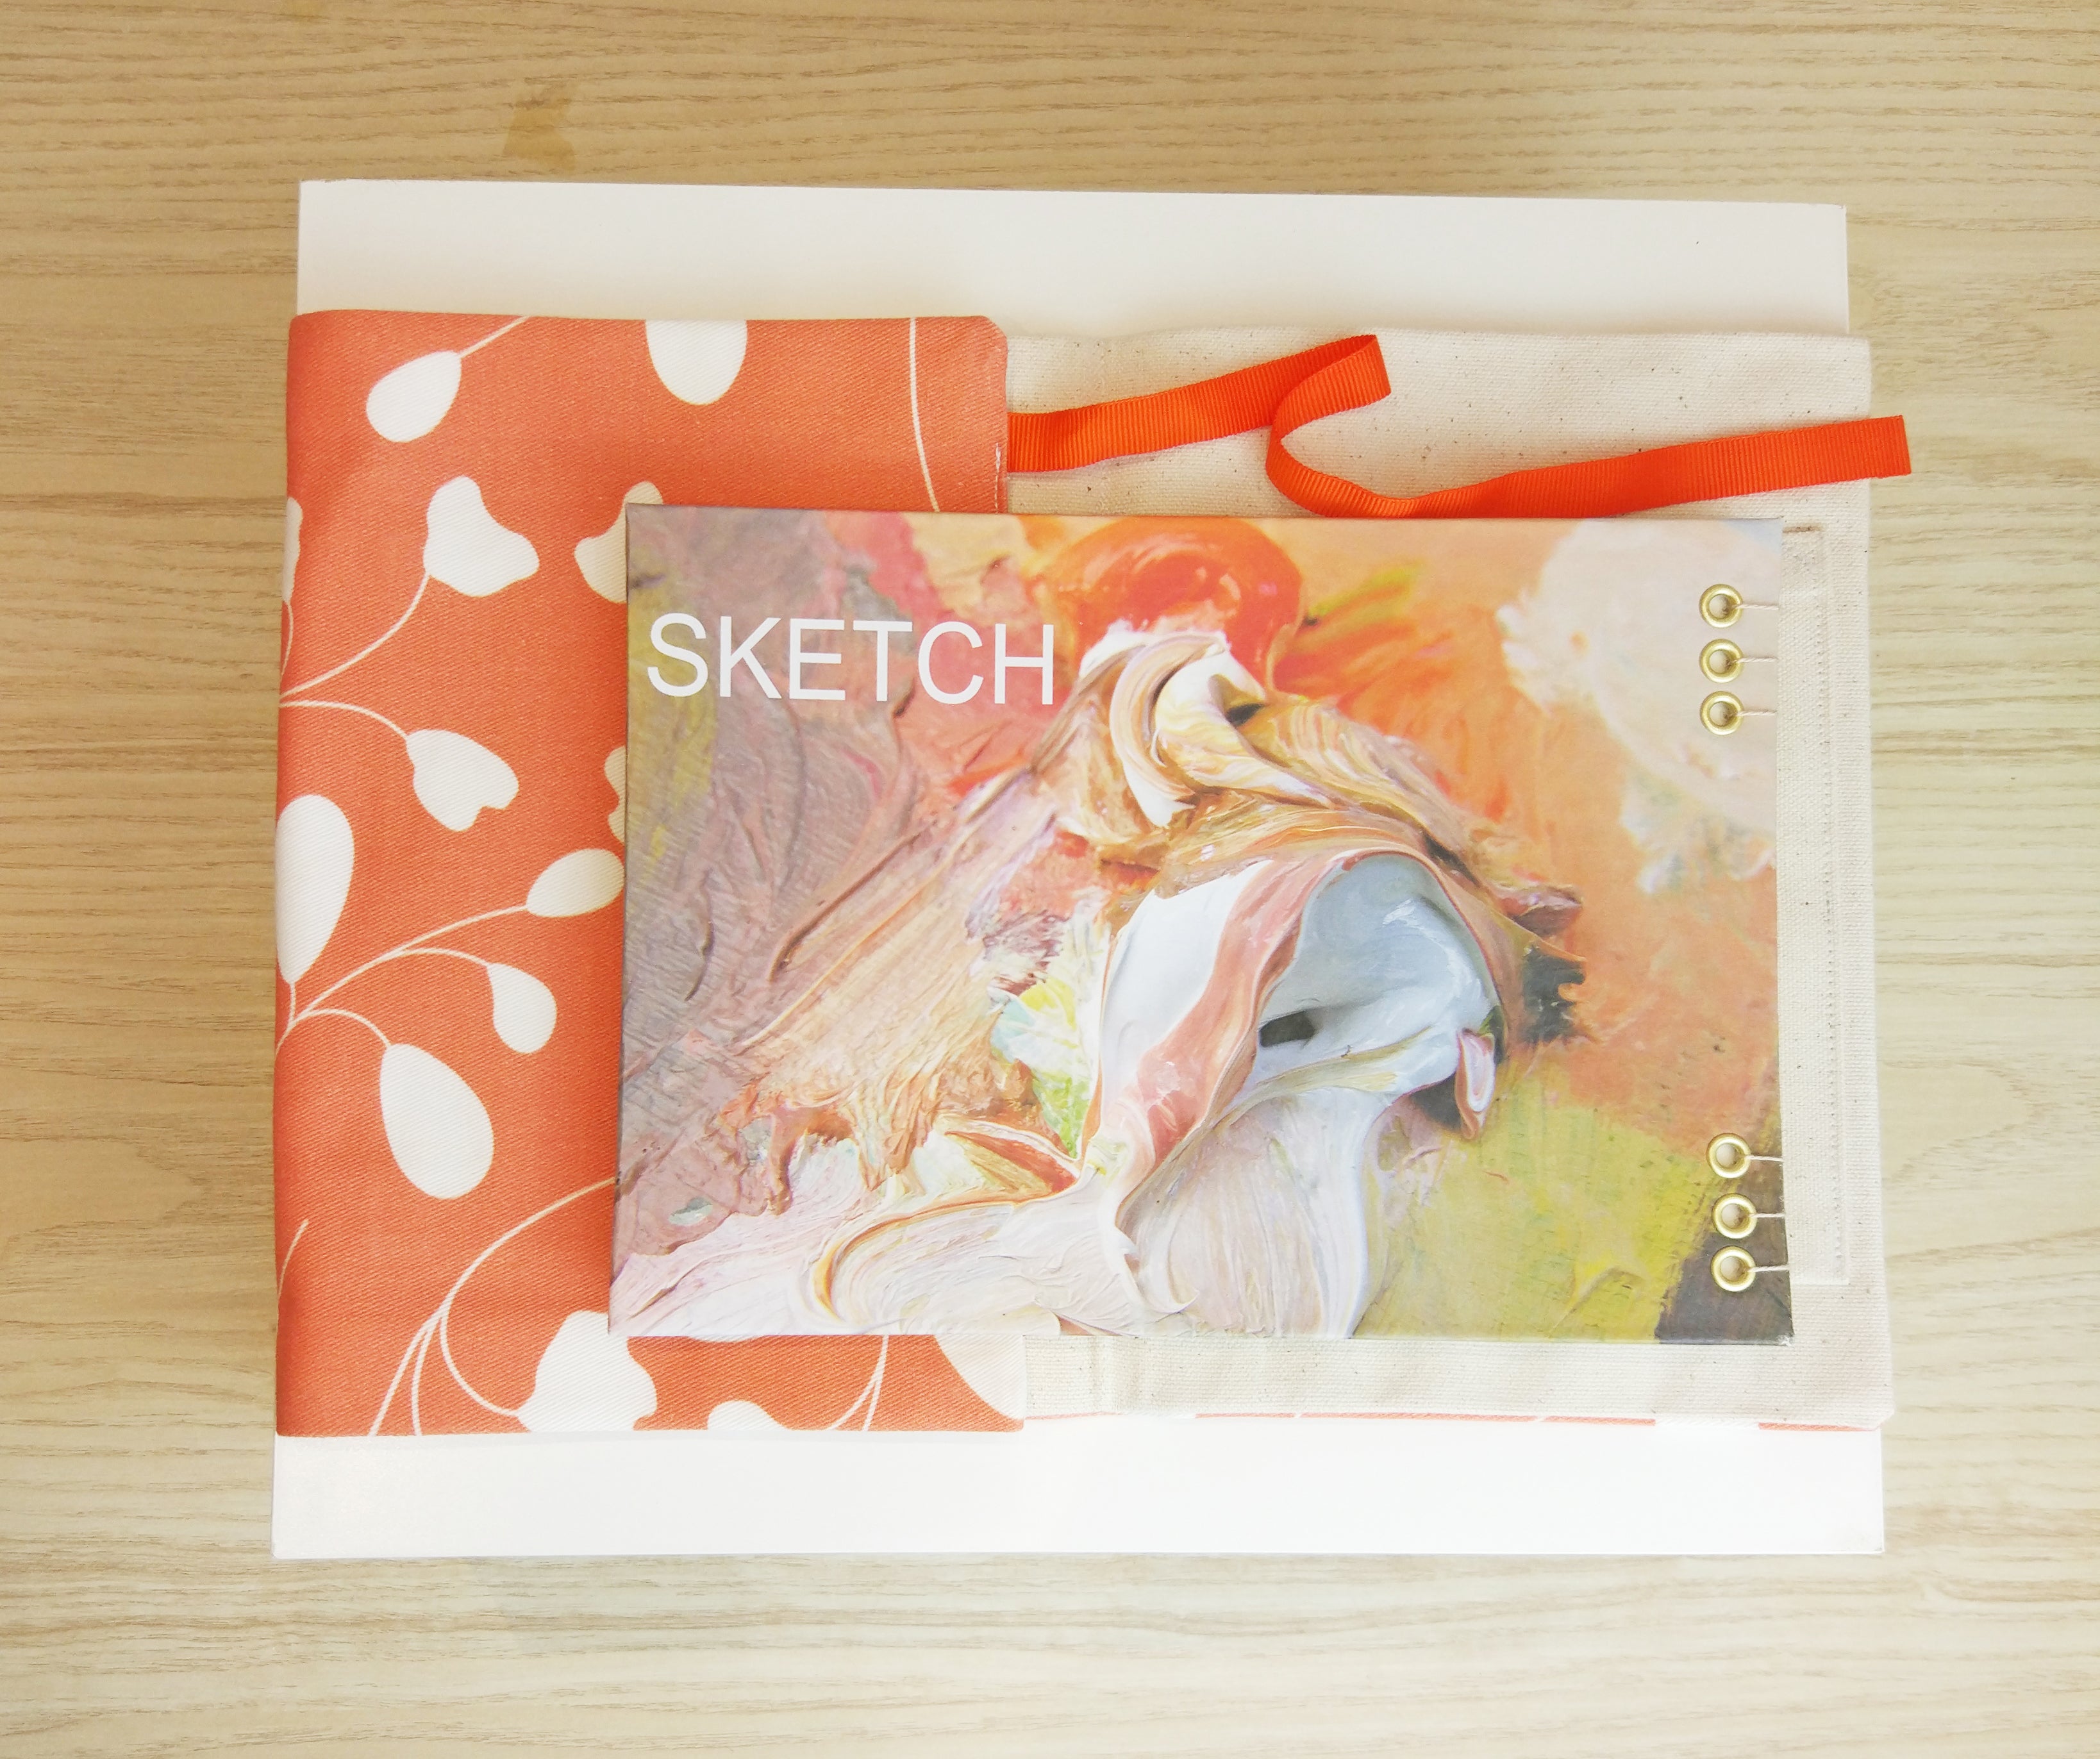 Artist's sketch book and equipment roll